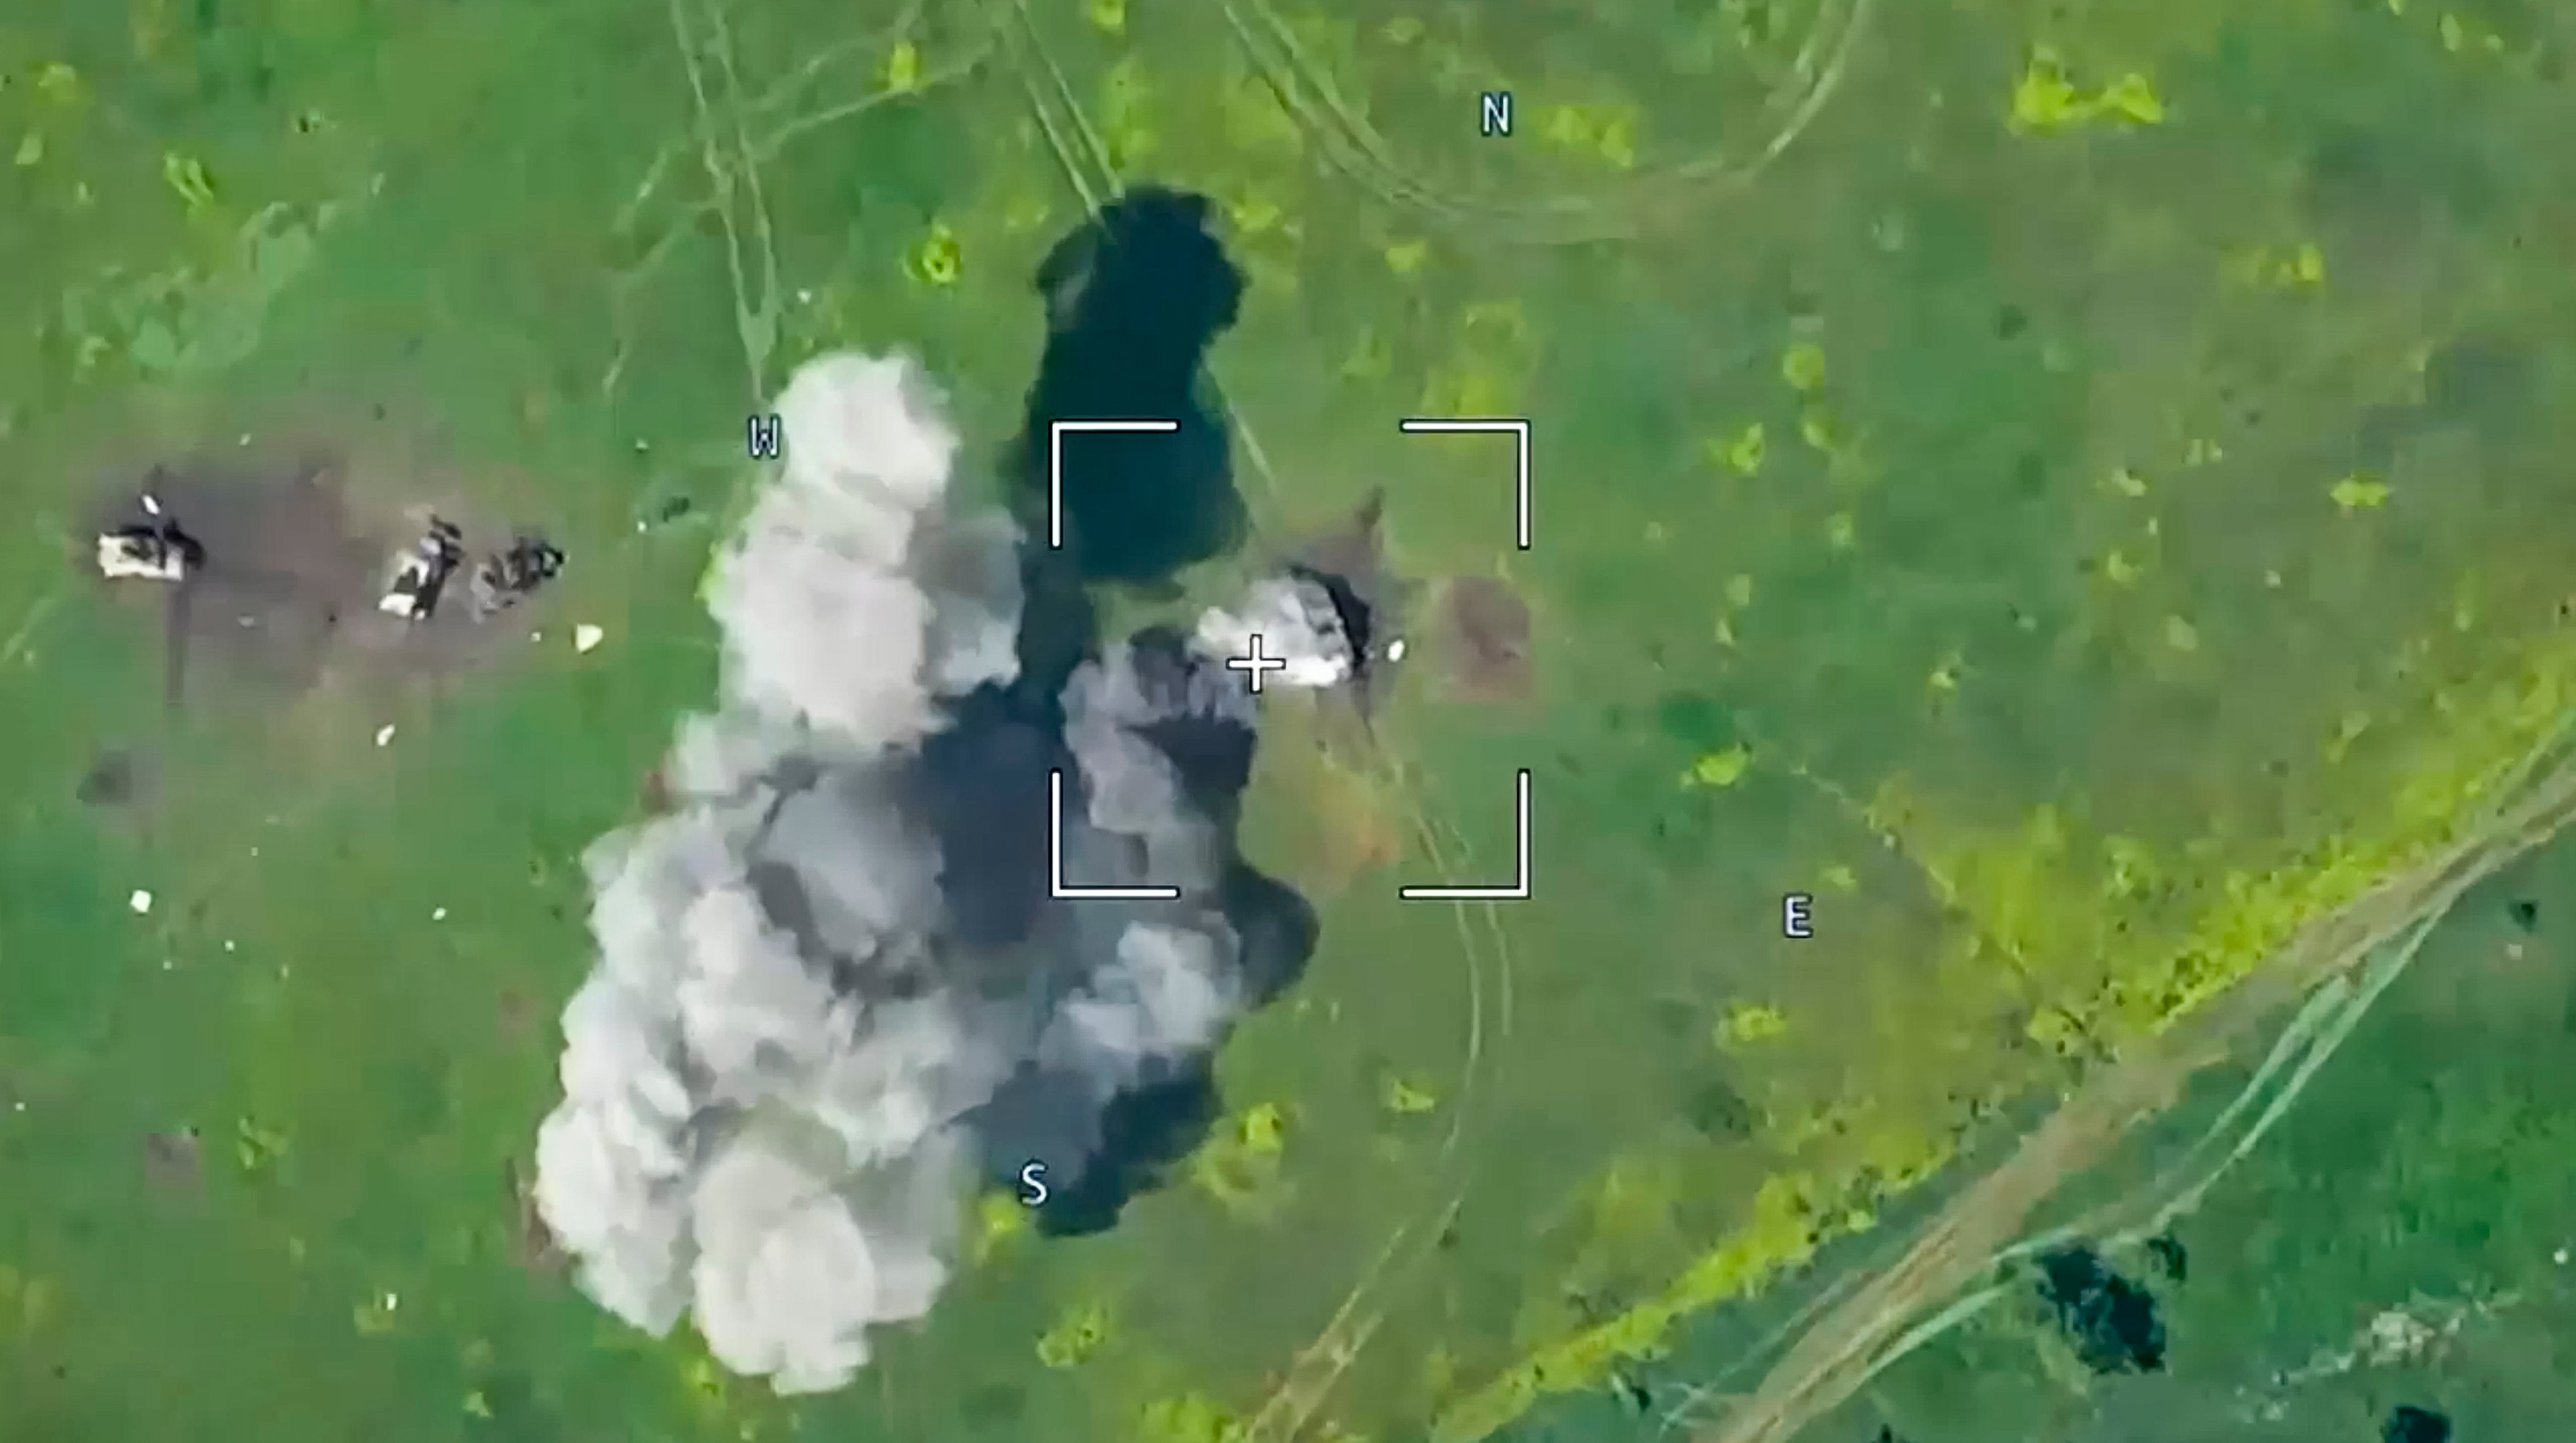 Video released by Moscow claiming to show Ukrainian vehicles being destroyed in Donetsk